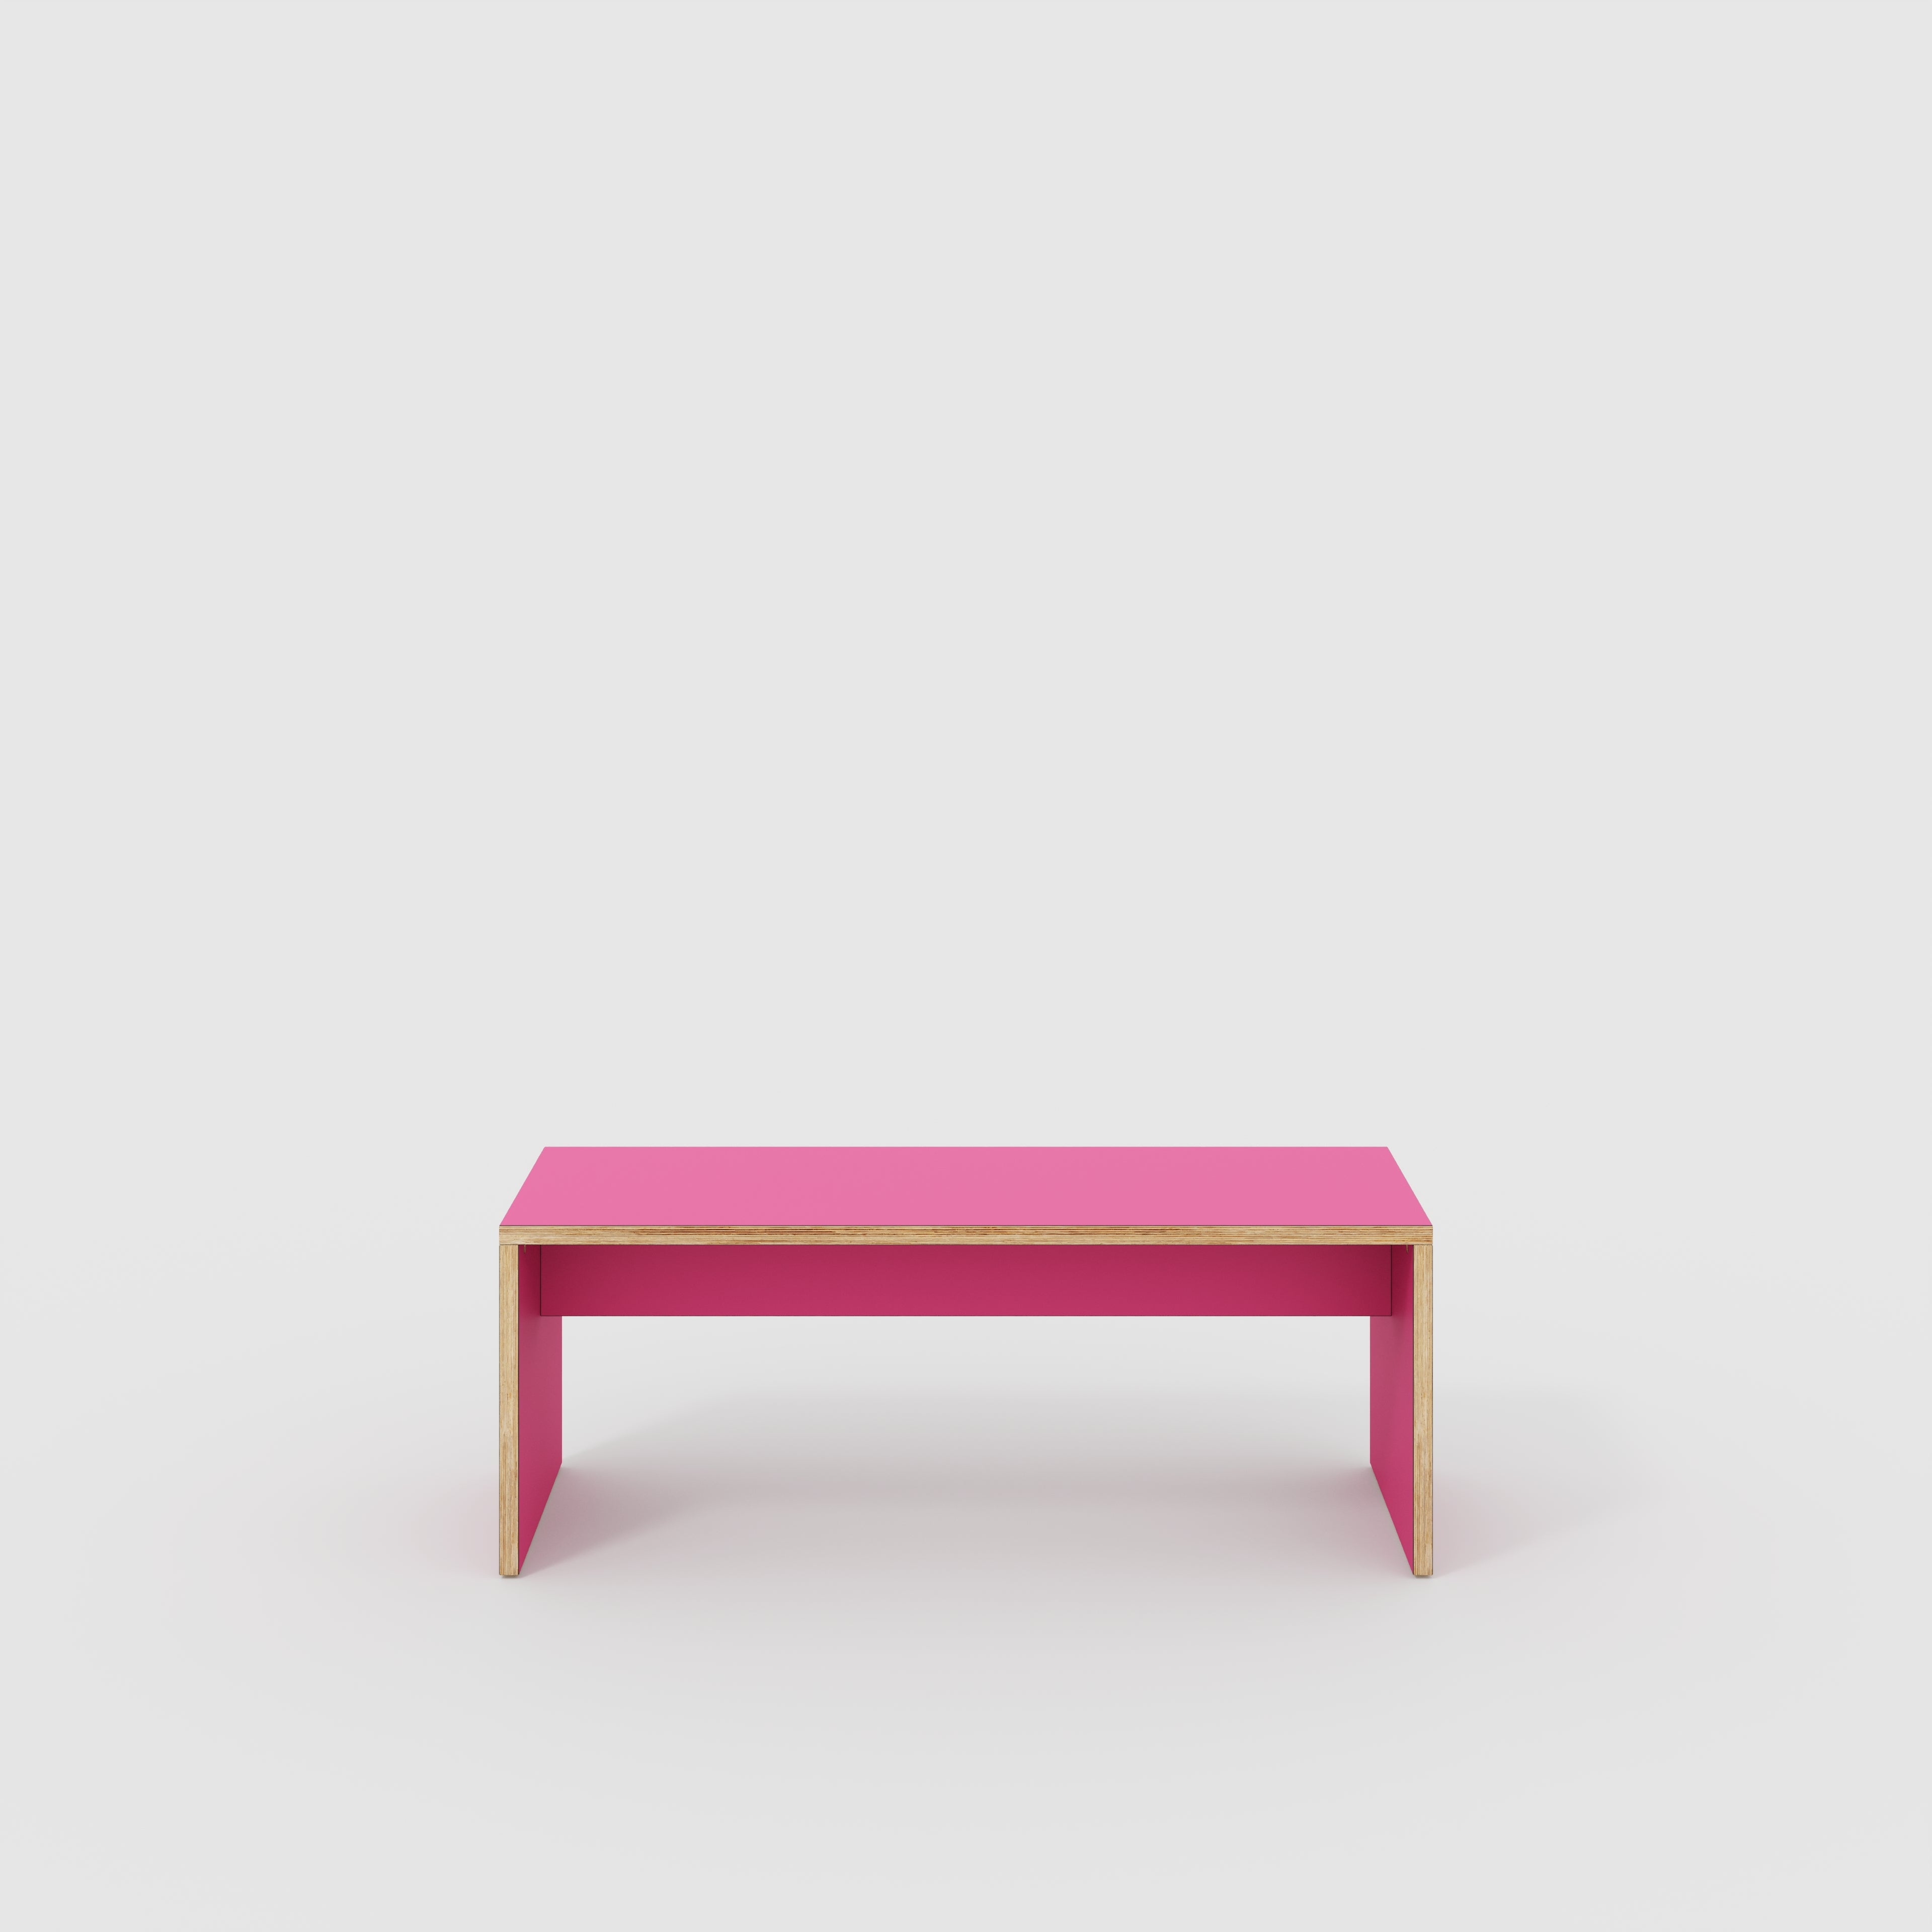 Bench Seat with Solid Sides - Formica Juicy Pink - 1200(w) x 400(d)